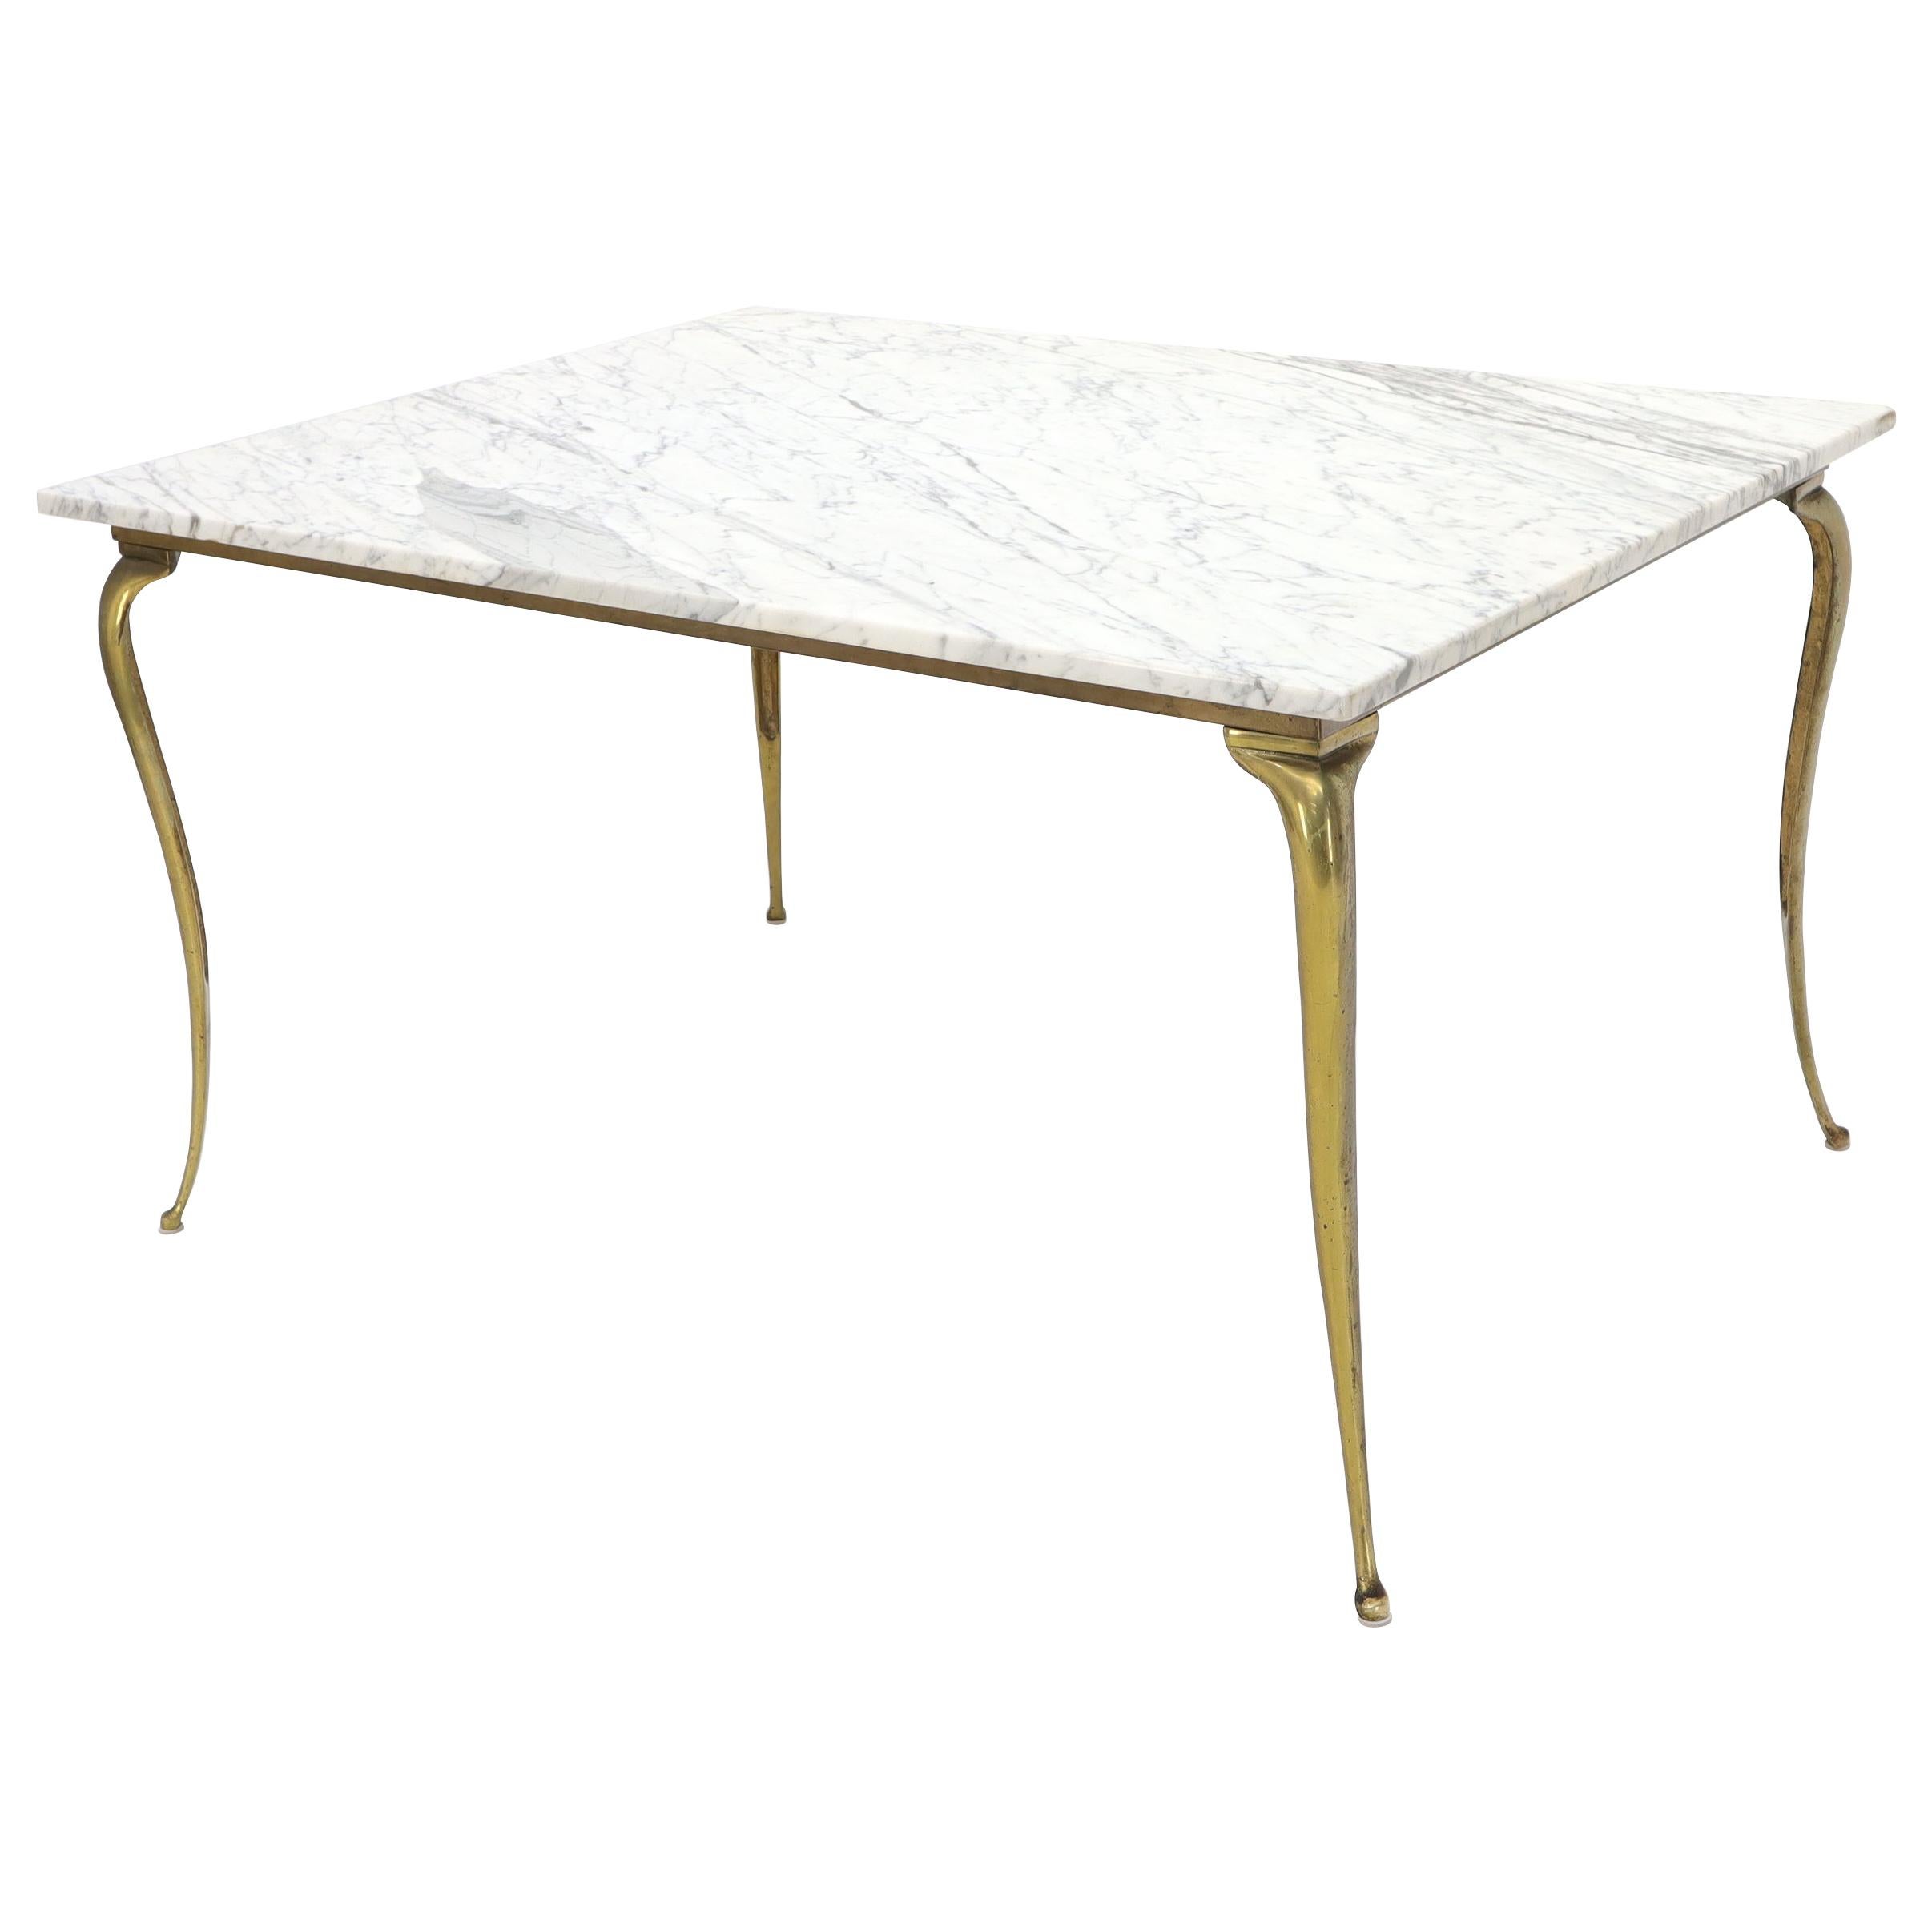 Rectangular Marble-Top Dining Table on Brass Legs